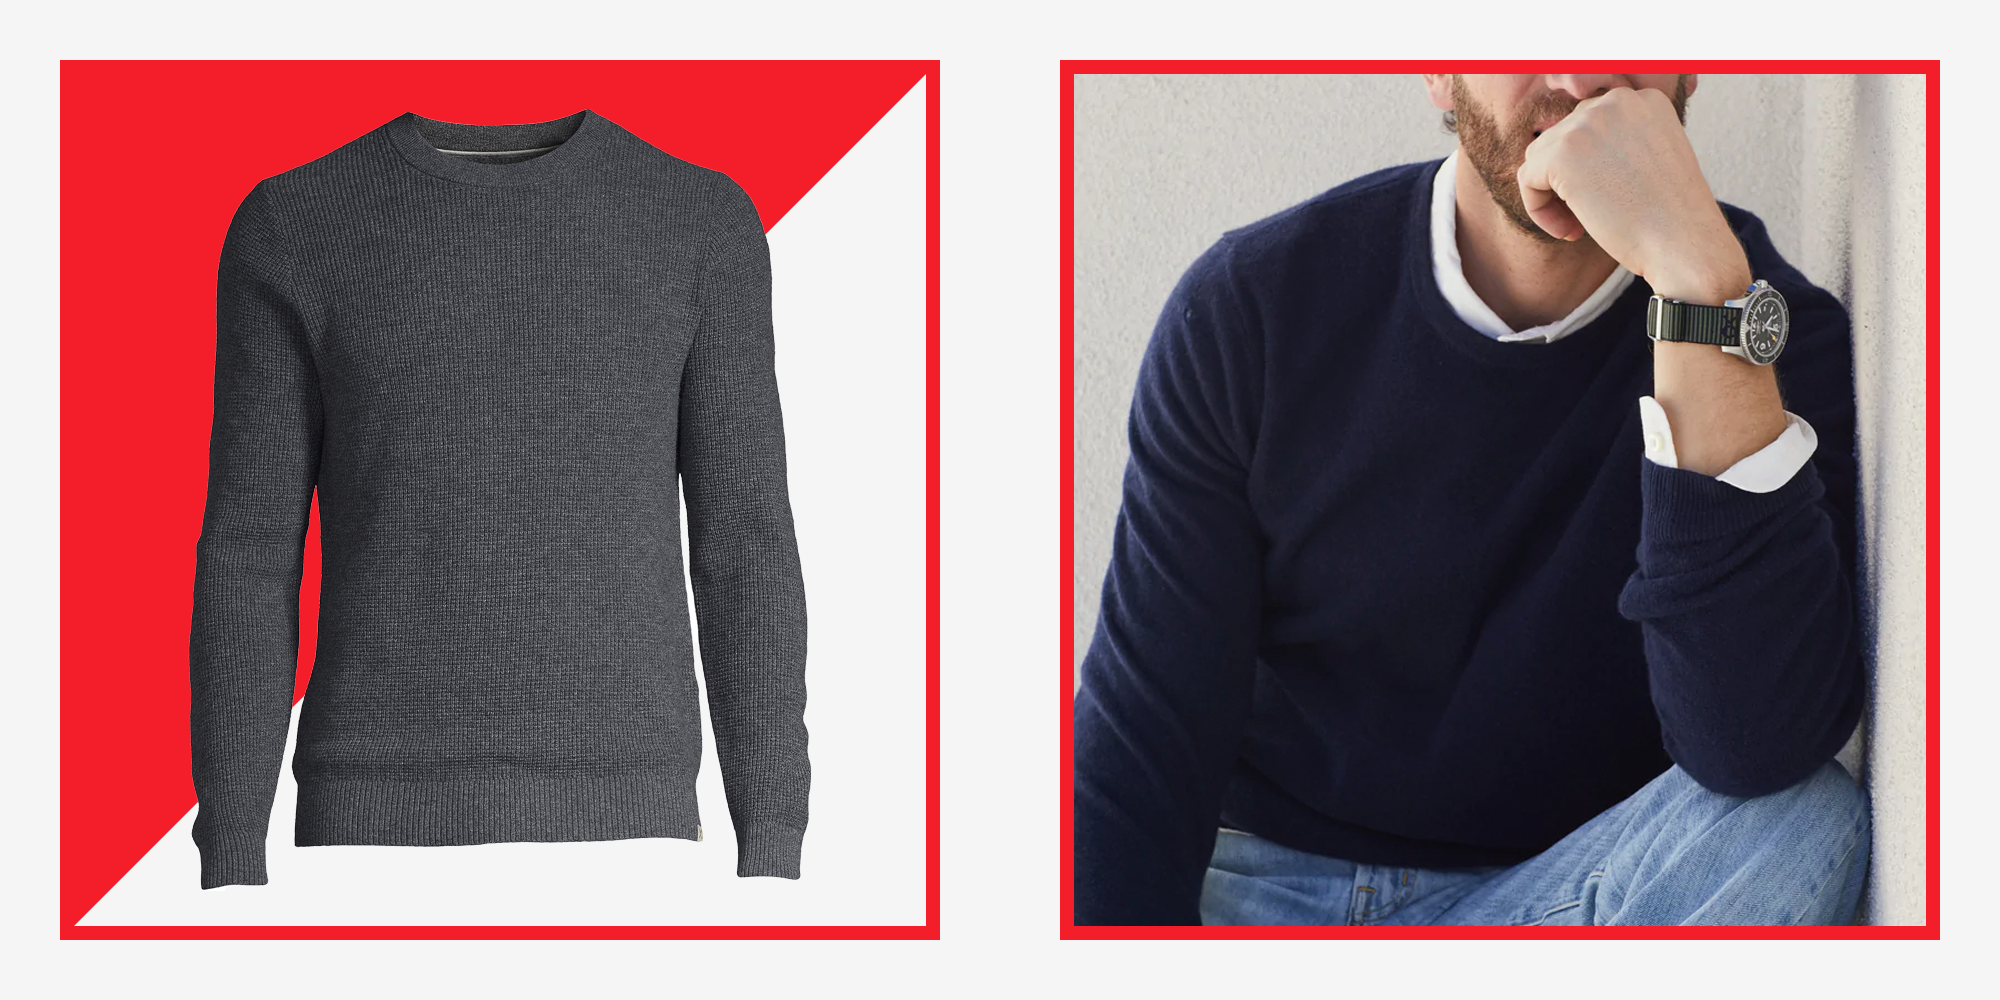 systeem Beter opwinding The 19 Best Cashmere Sweaters for Men, According to Stylish Guys